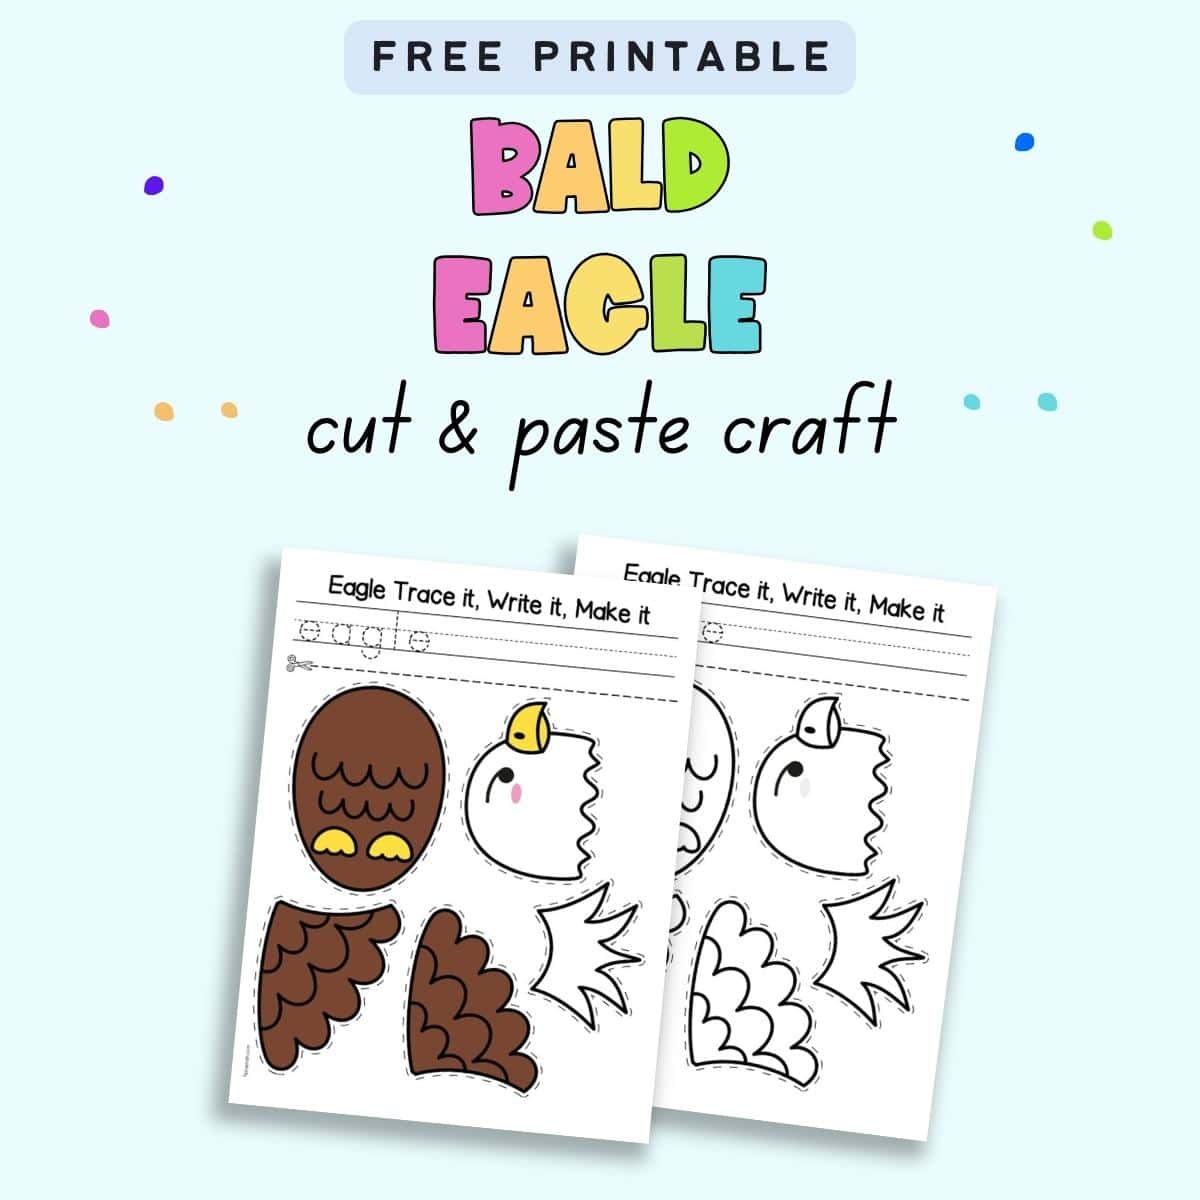 Text "free printable bald eagle cut and paste craft" with a preview of two pages of cut and paste eagle craft. One is in color and the other in black and white.